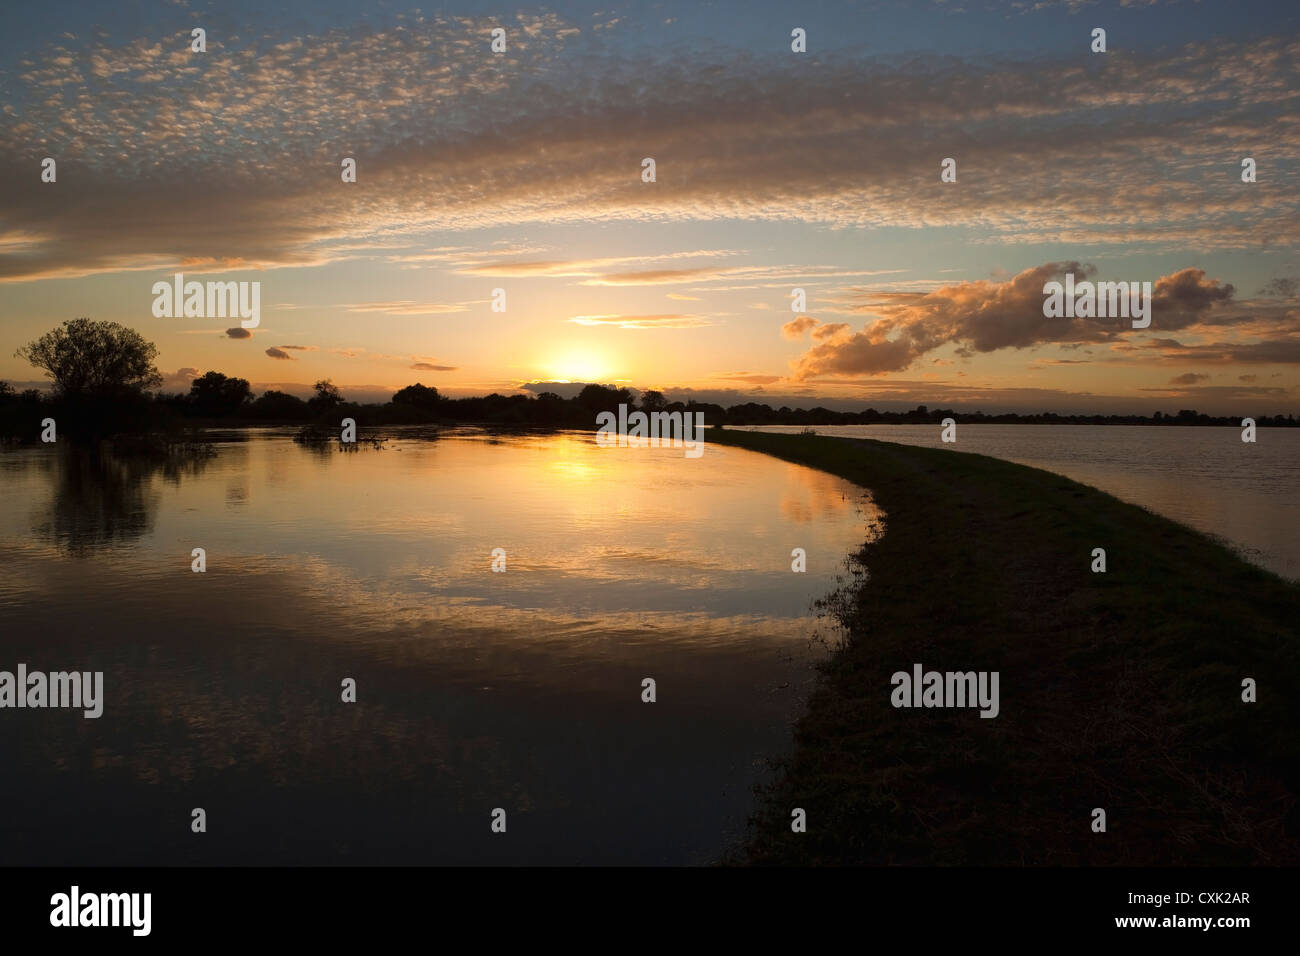 An Autumn landscape with sunset over the flood waters of the lower Derwent valley in Yorkshire england Stock Photo